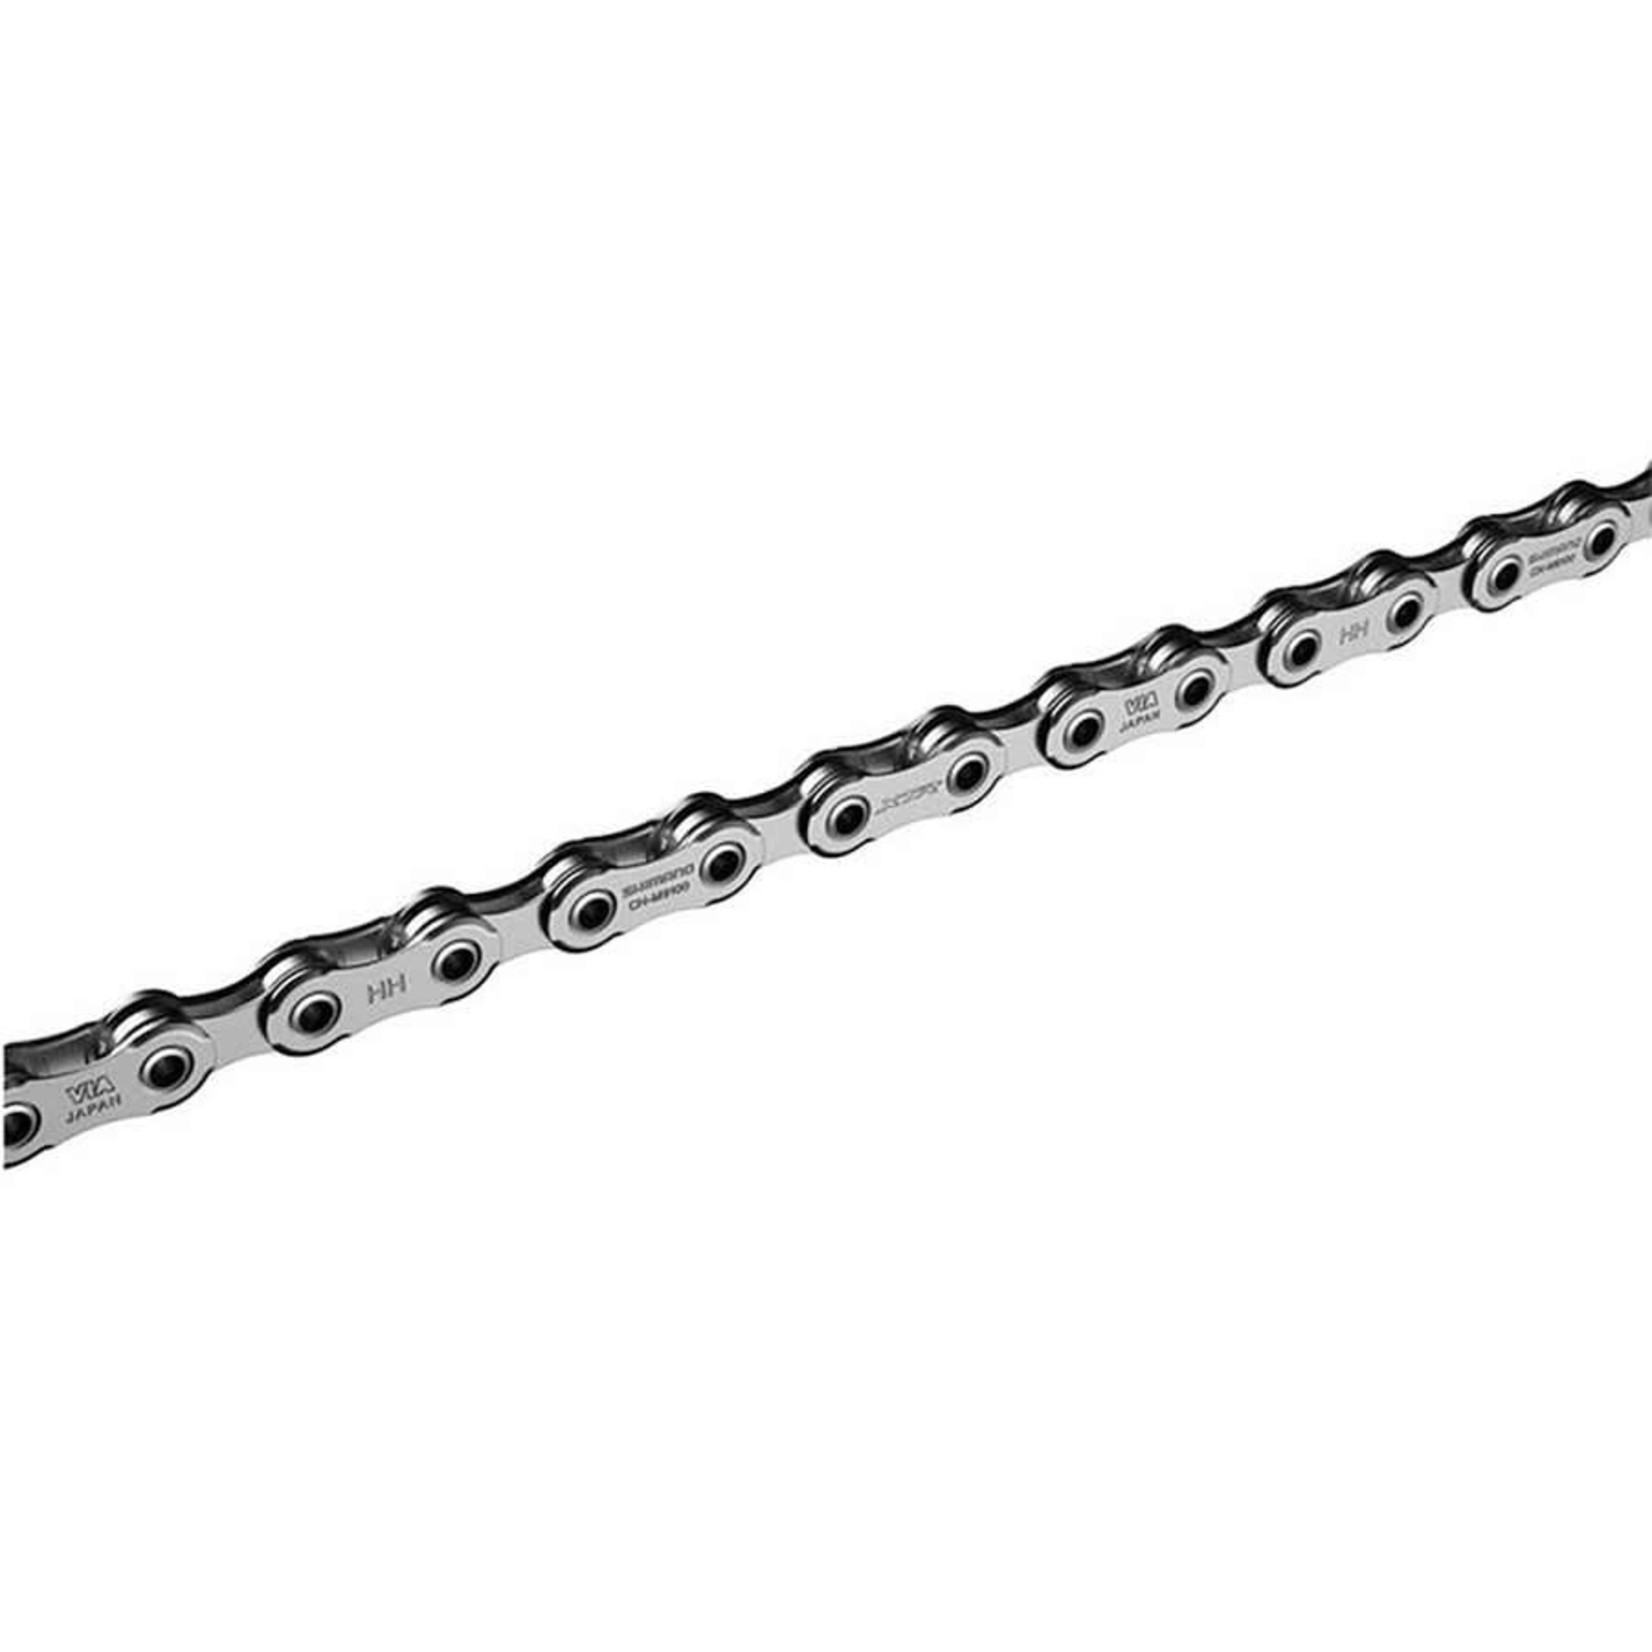 Shimano SHIMANO, CN-M9100 Chain, 126 Links, 12 Speed, w/ Quick Link